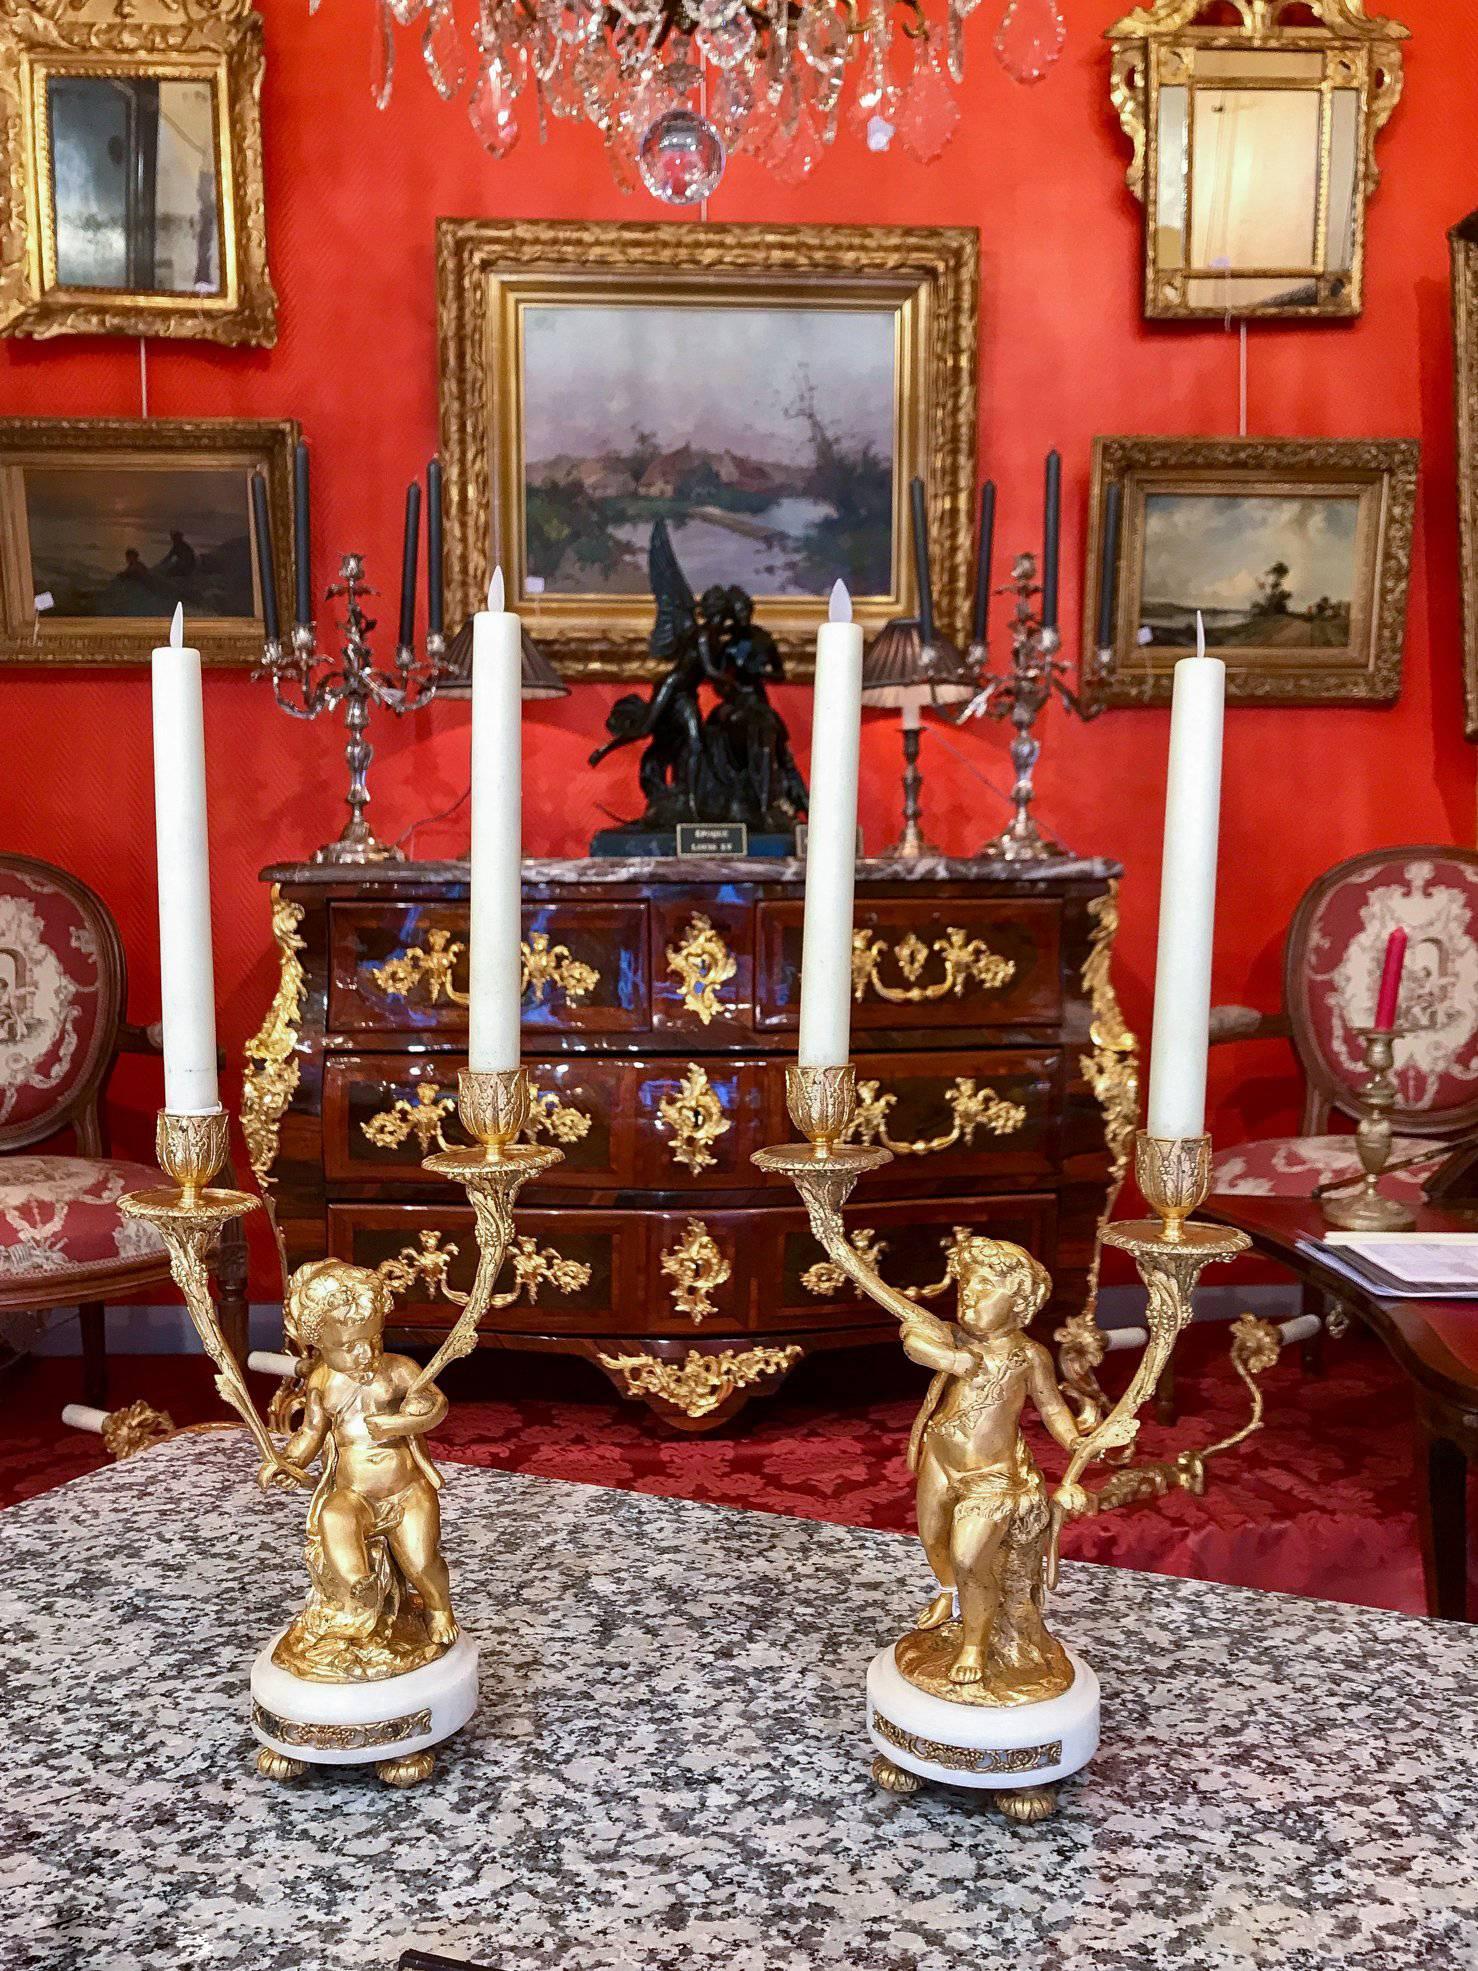 REDUCED PRICE FOR A WEEK, UNTIL FEBRUARY 17th

We are pleased to present you, a charming pair of candelabras are formed as cherubs or Putti holding the candelabra branches. Our candelabras raised on white Carrara Marble bases.

The quality of the